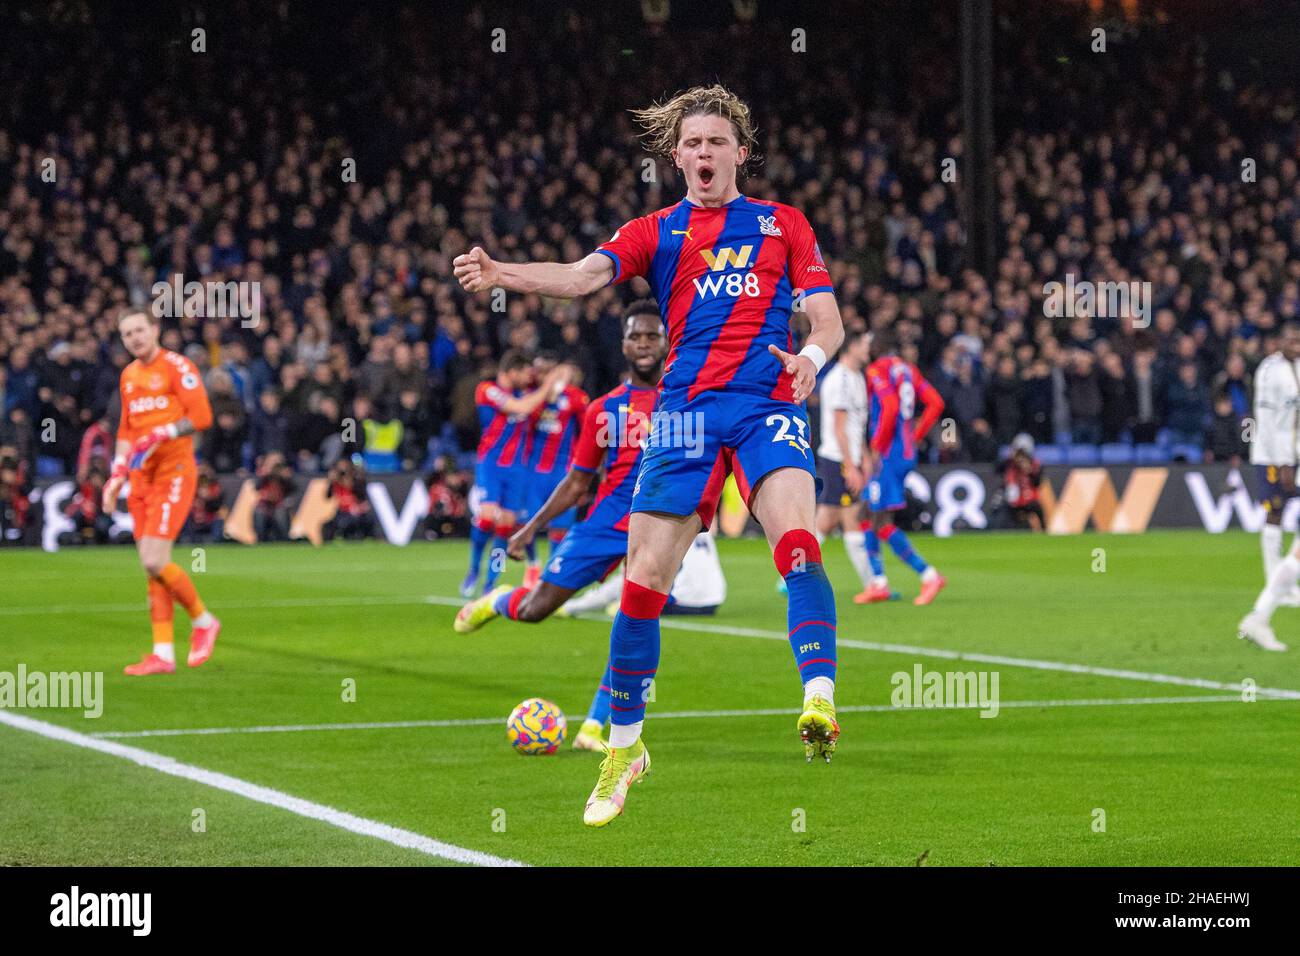 LONDON, ENGLAND - DECEMBER 12: Conor Gallagher of Crystal Palace celebrates after scoring goal during the Premier League match between Crystal Palace and Everton at Selhurst Park on December 12, 2021 in London, England. (Photo by Sebastian Frej) Credit: Sebo47/Alamy Live News Stock Photo